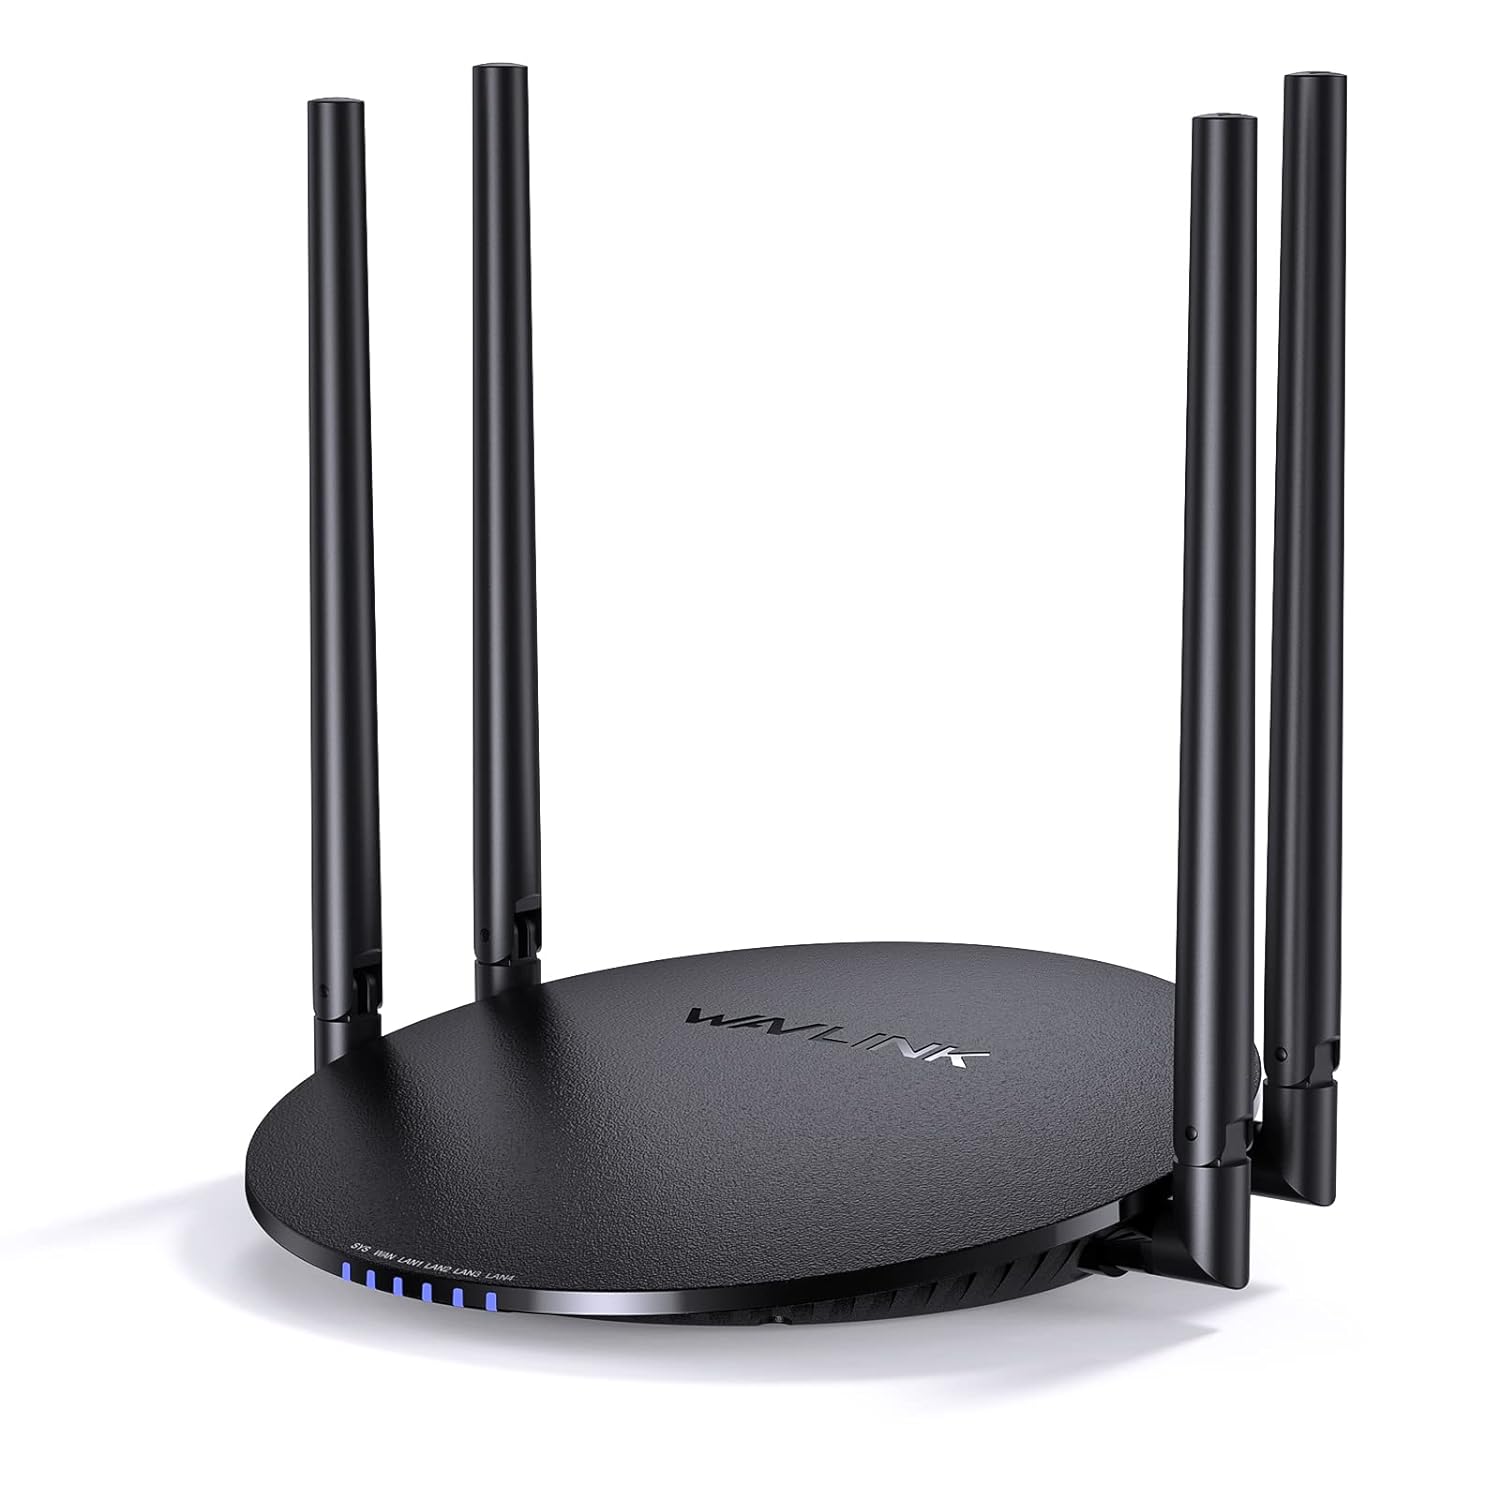 WAVLINK AC1200 WiFi Router Wireless Internet Router for Home,Dual Band Router(2.4GHz and 5GHz) with 1000Mbps WAN/LAN Gigabit …